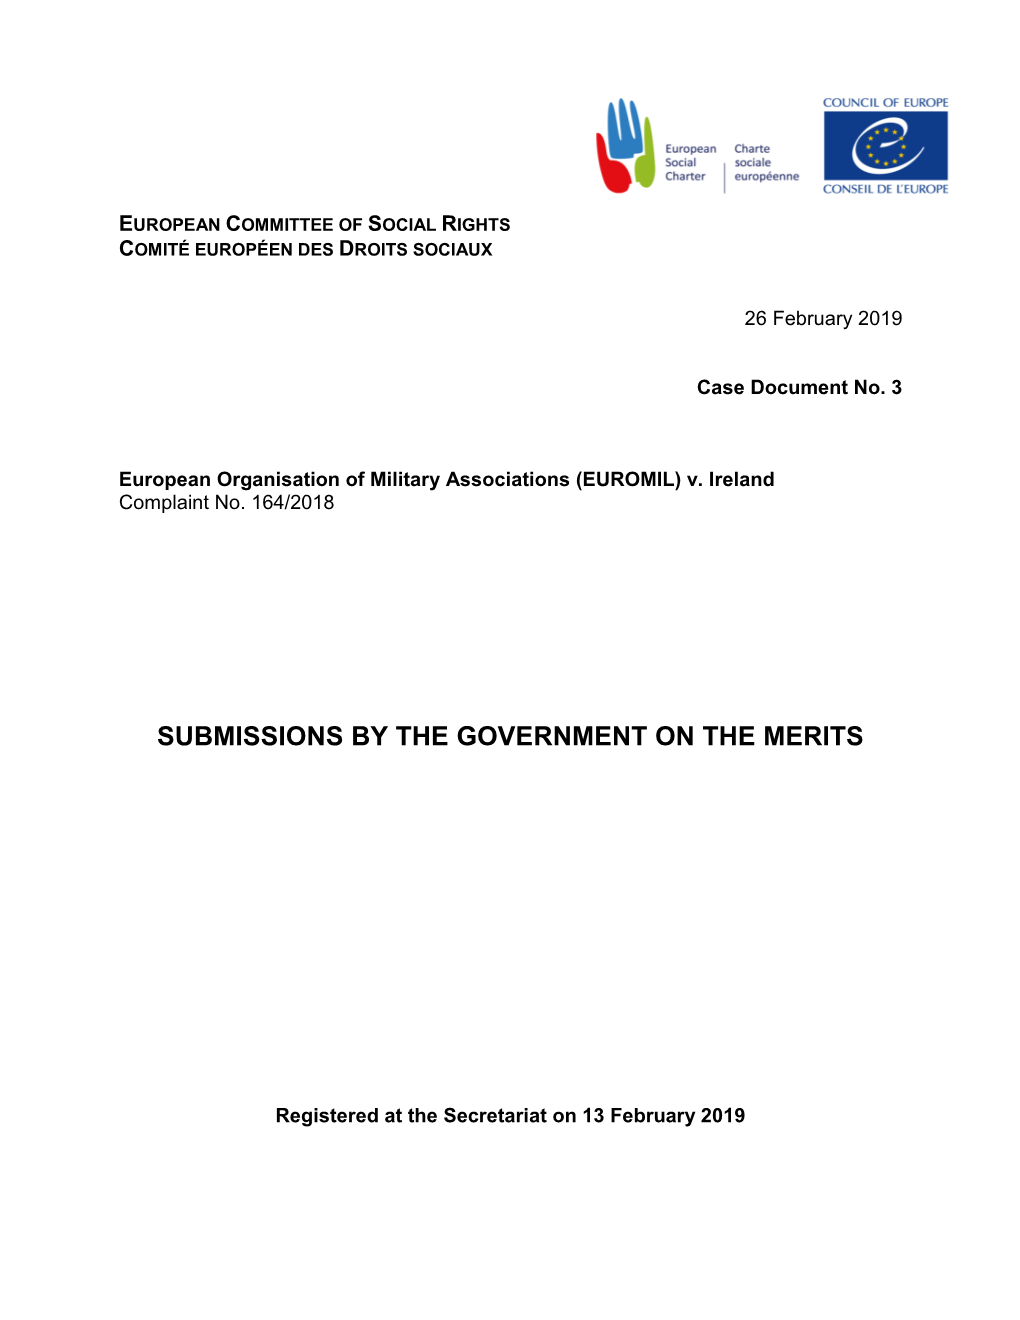 Submissions by the Government on the Merits